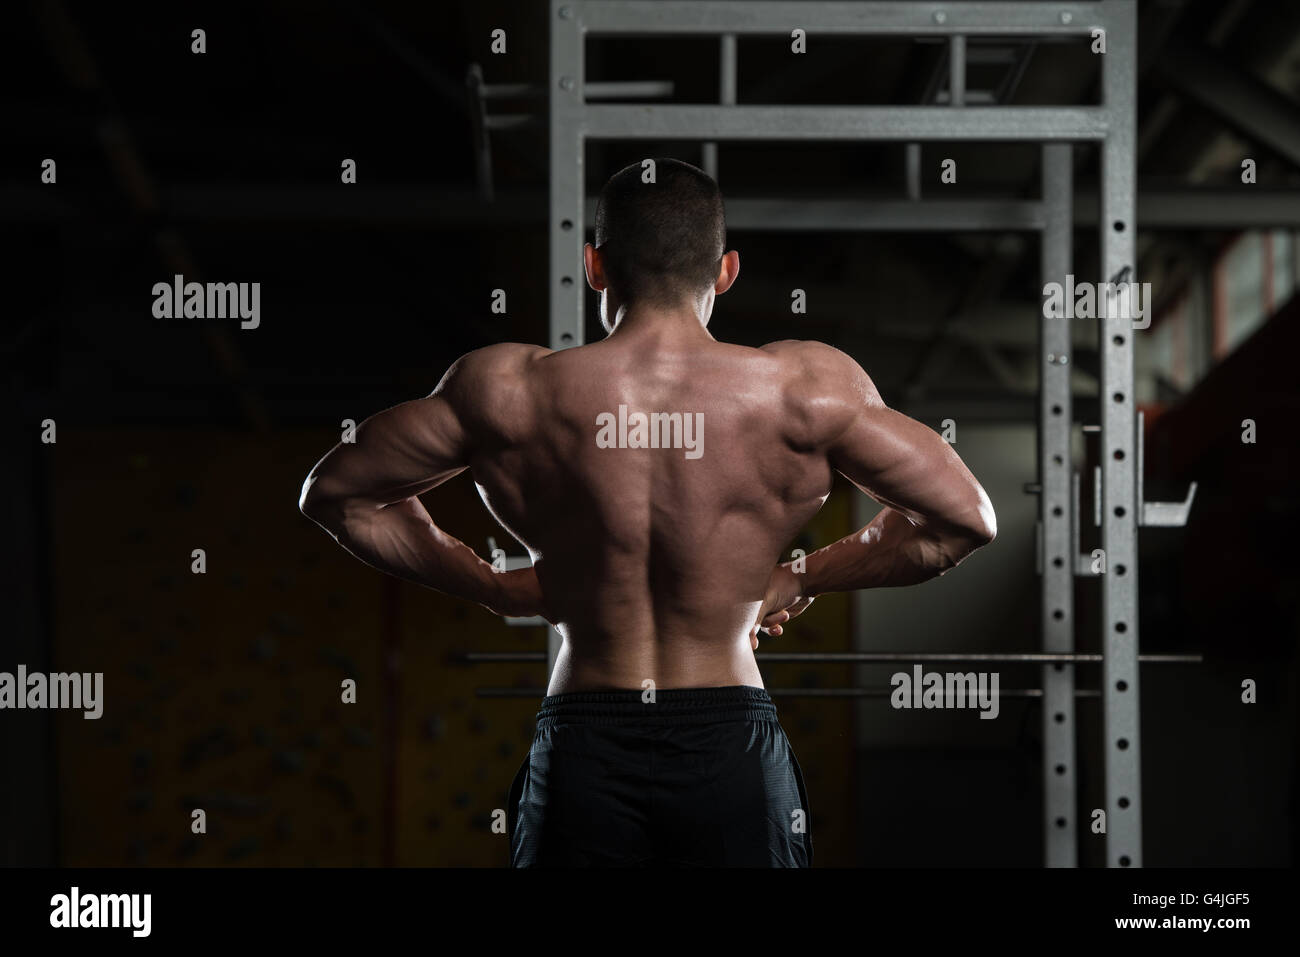 Male Fitness Model Bodybuilder Back Pose On Black Background Stock Photo -  Download Image Now - iStock